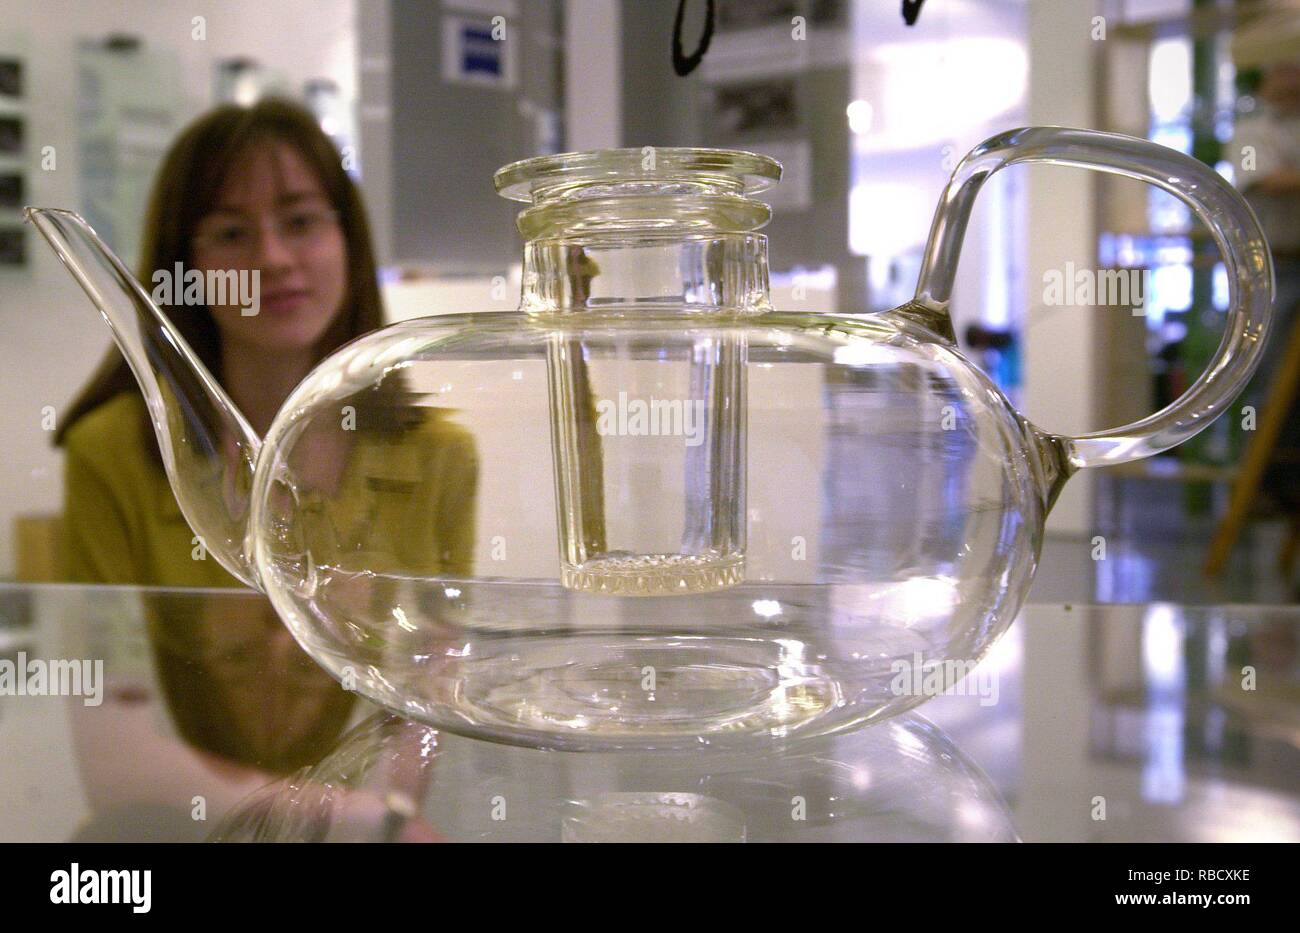 Jena (Thuringen): The famous teapot by Bauhaus designer Wilhelm Wagenfeld  is viewed on 29.08.2000 by a young woman in the Schott GlasMuseum in Jena,  which will be opened on 1 September 2000